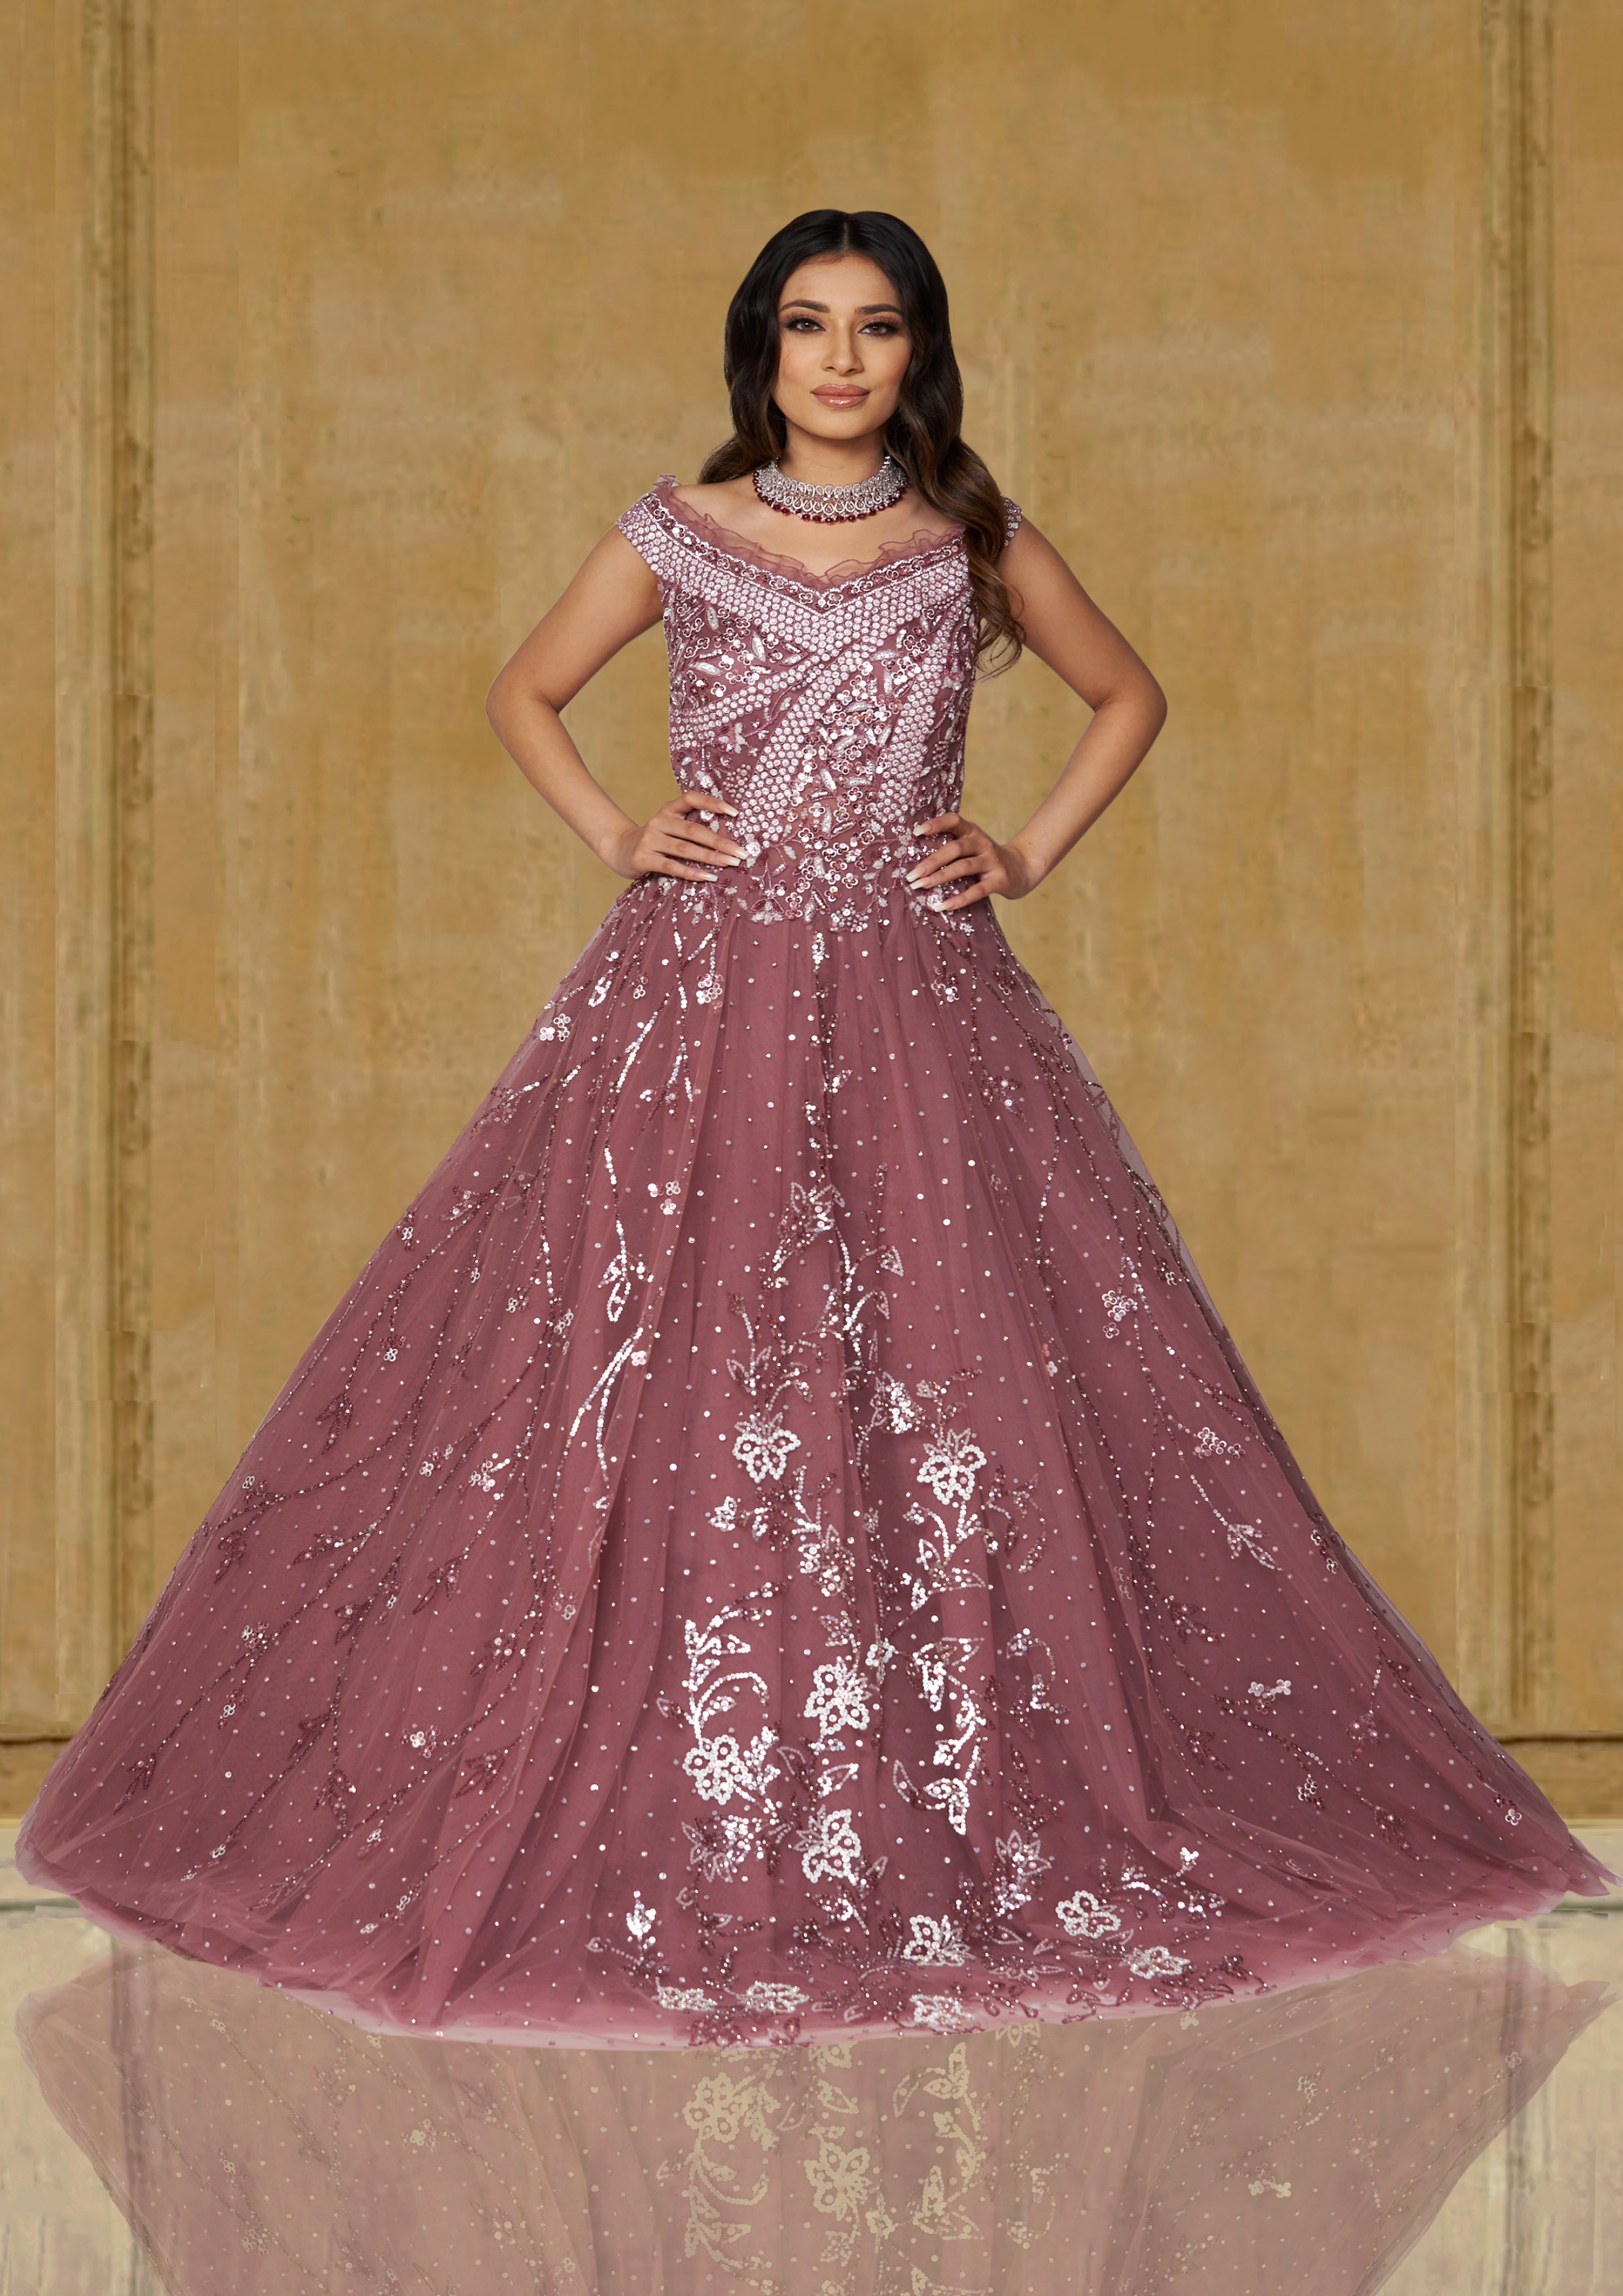 Arabic Luxurious Lace Beaded Mermaid Halter Evening Gown With Sheer  Neckline And Long Sleeves Perfect For Prom, Formal Parties, And Reception  In 2020 From Babydress001, $91.46 | DHgate.Com